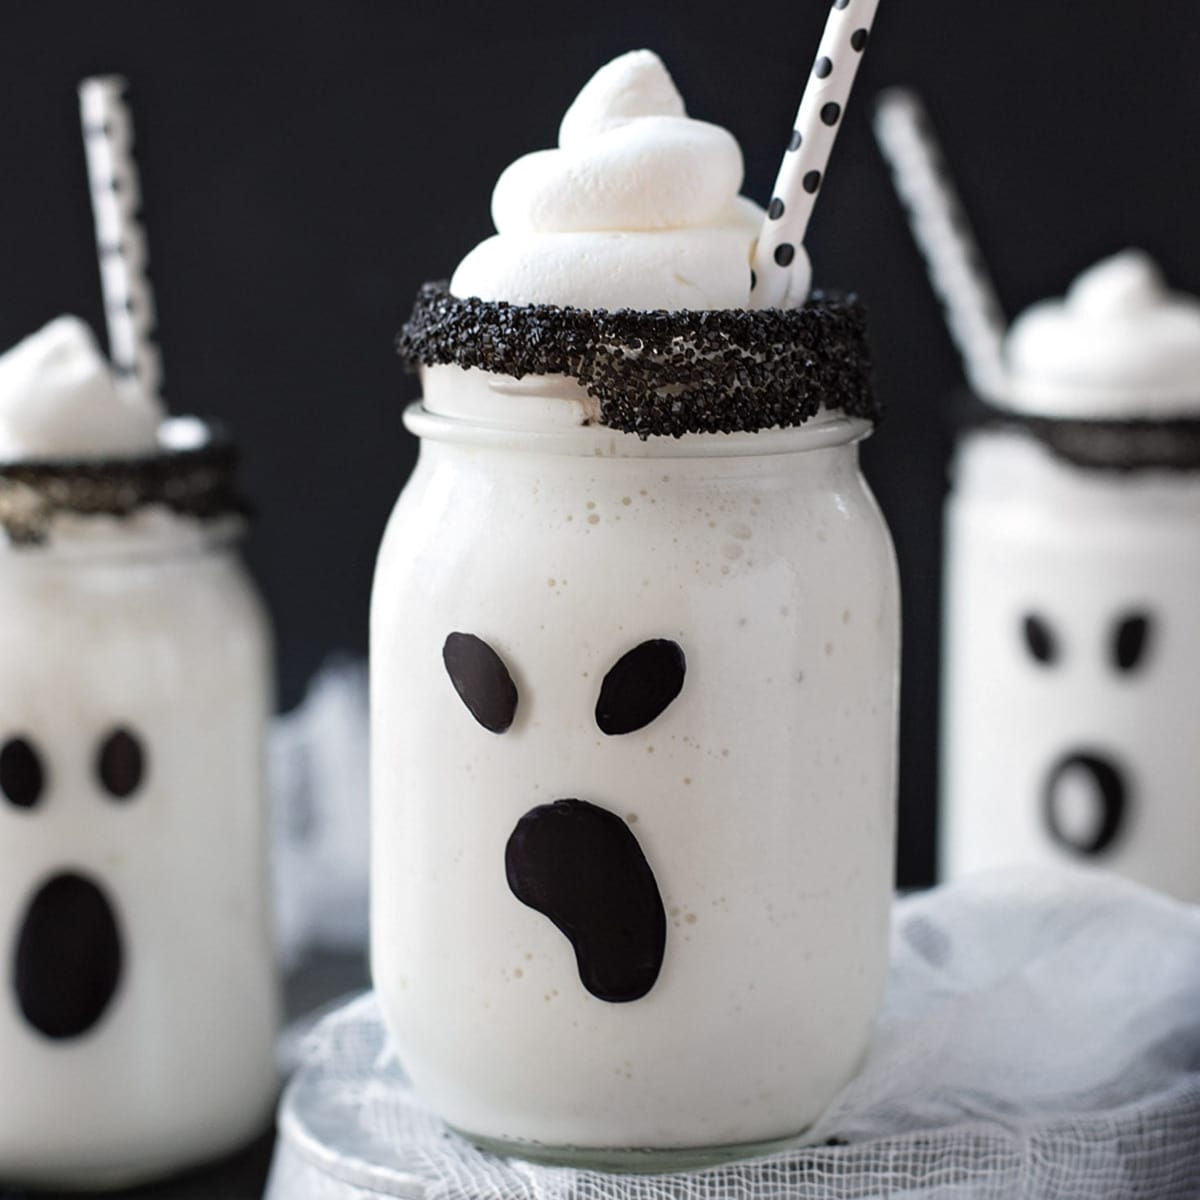 Halloween drinks - Boo-nilla ghost milkshake topped with whipped cream.